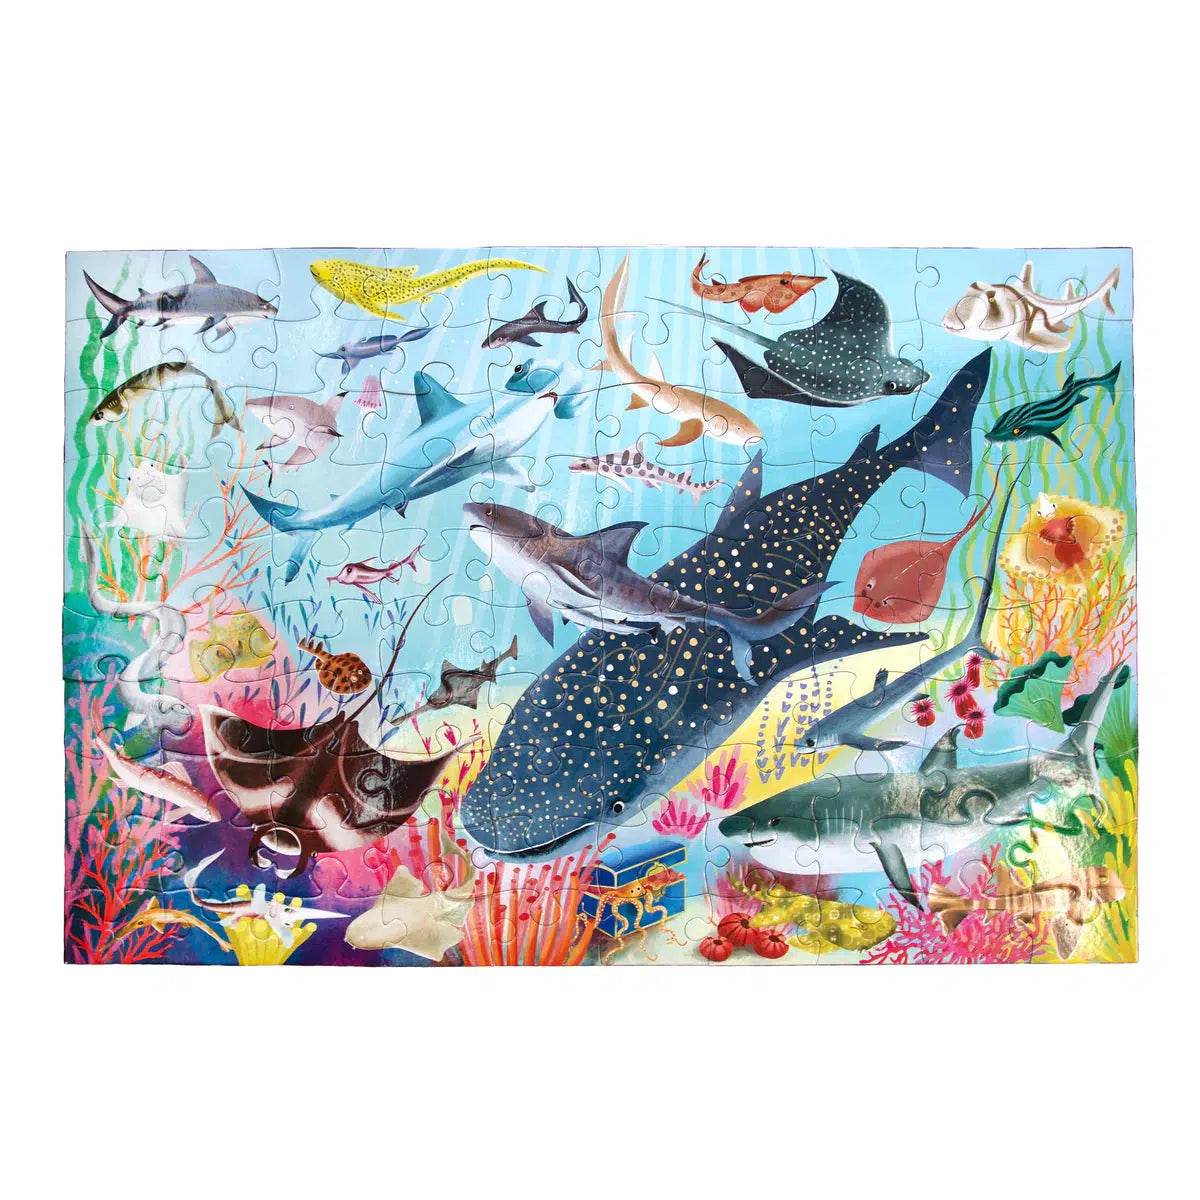 Front view of the love of sharks puzzle when completed.